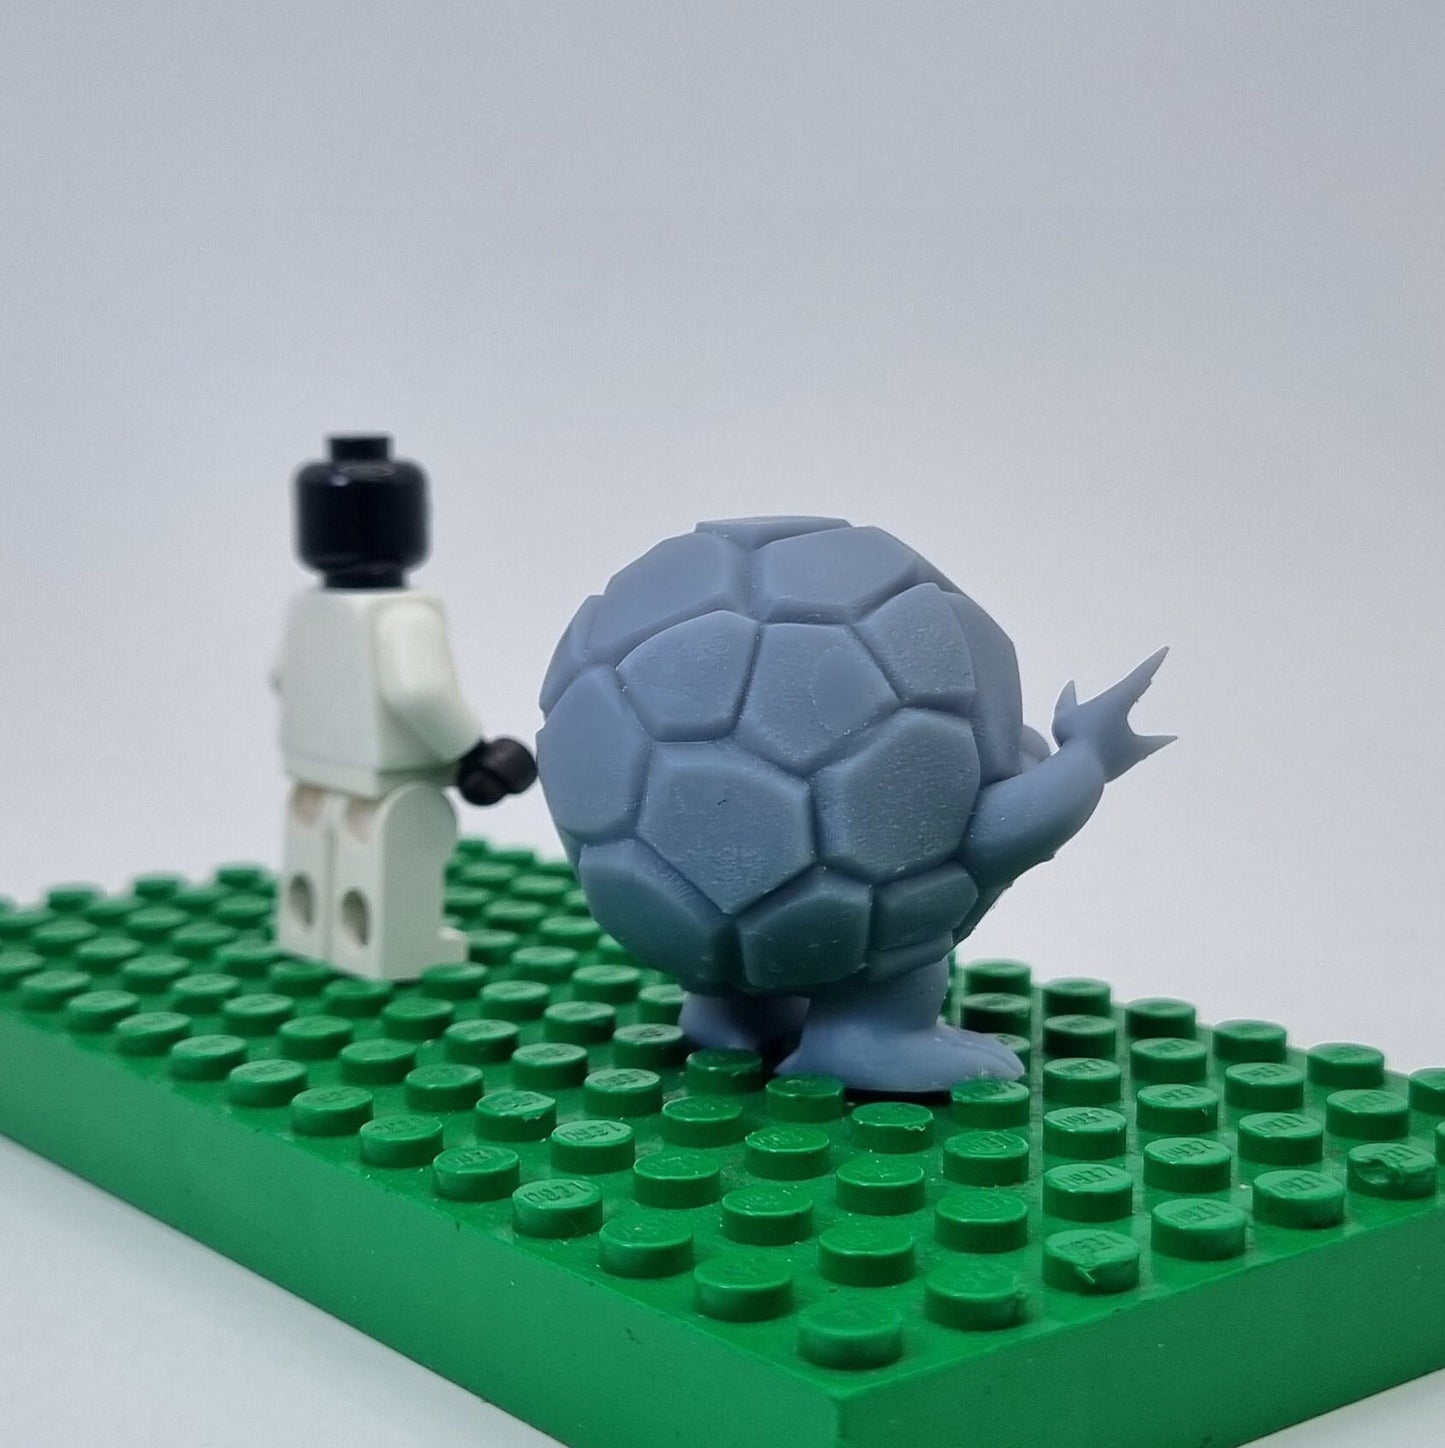 Building toy custom 3D printed animal to catch round rock!